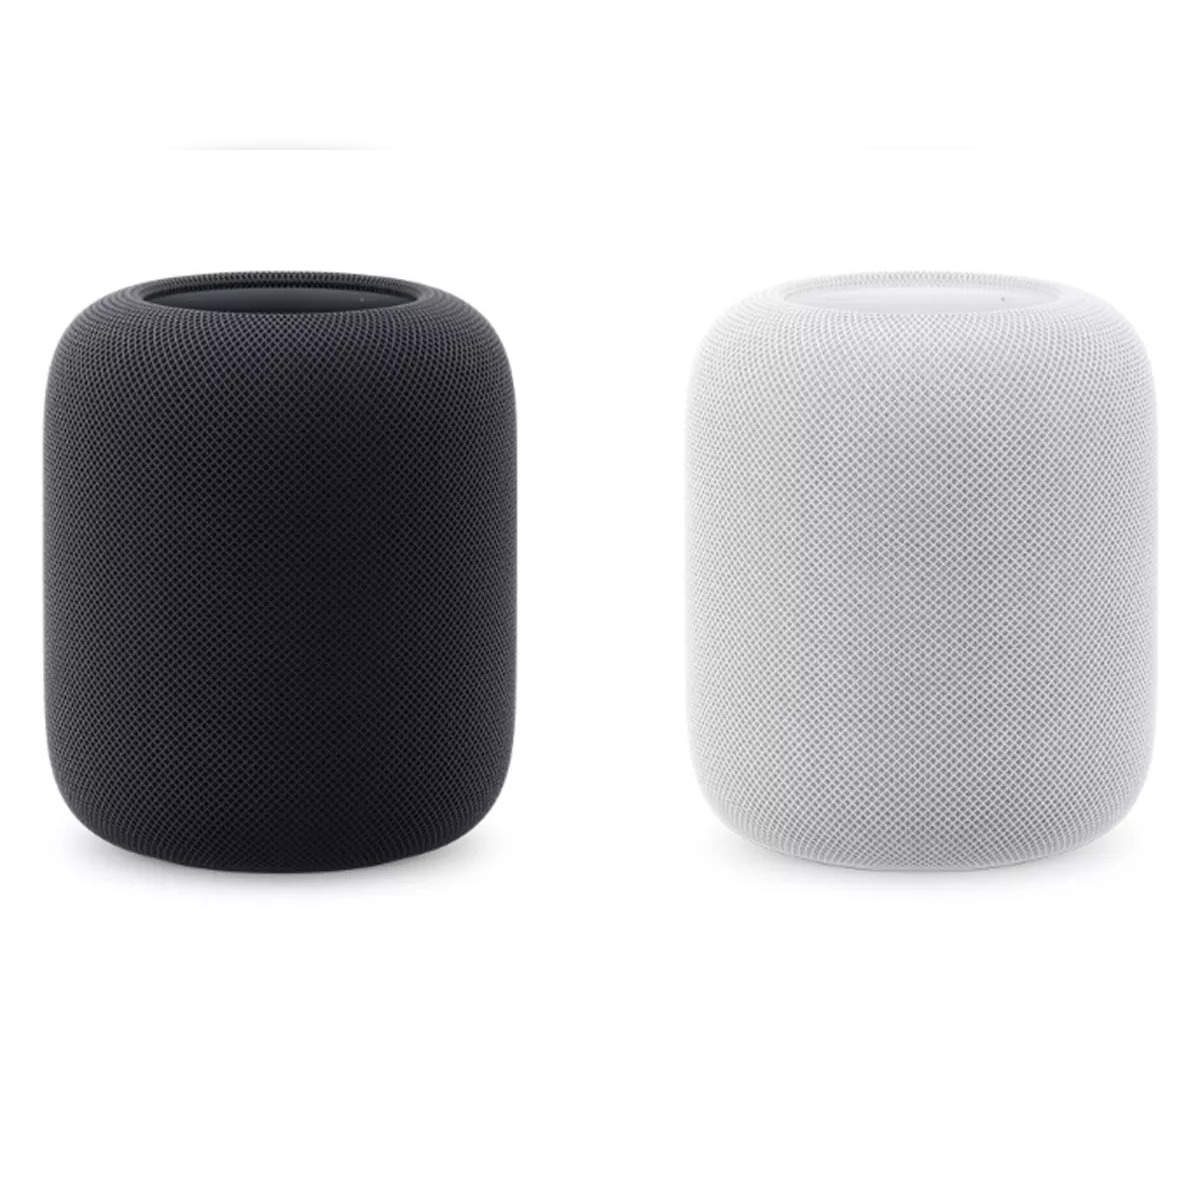 Apple's HomePod Is a Good Smart Speaker. But the Mini Is Better for Most  People.